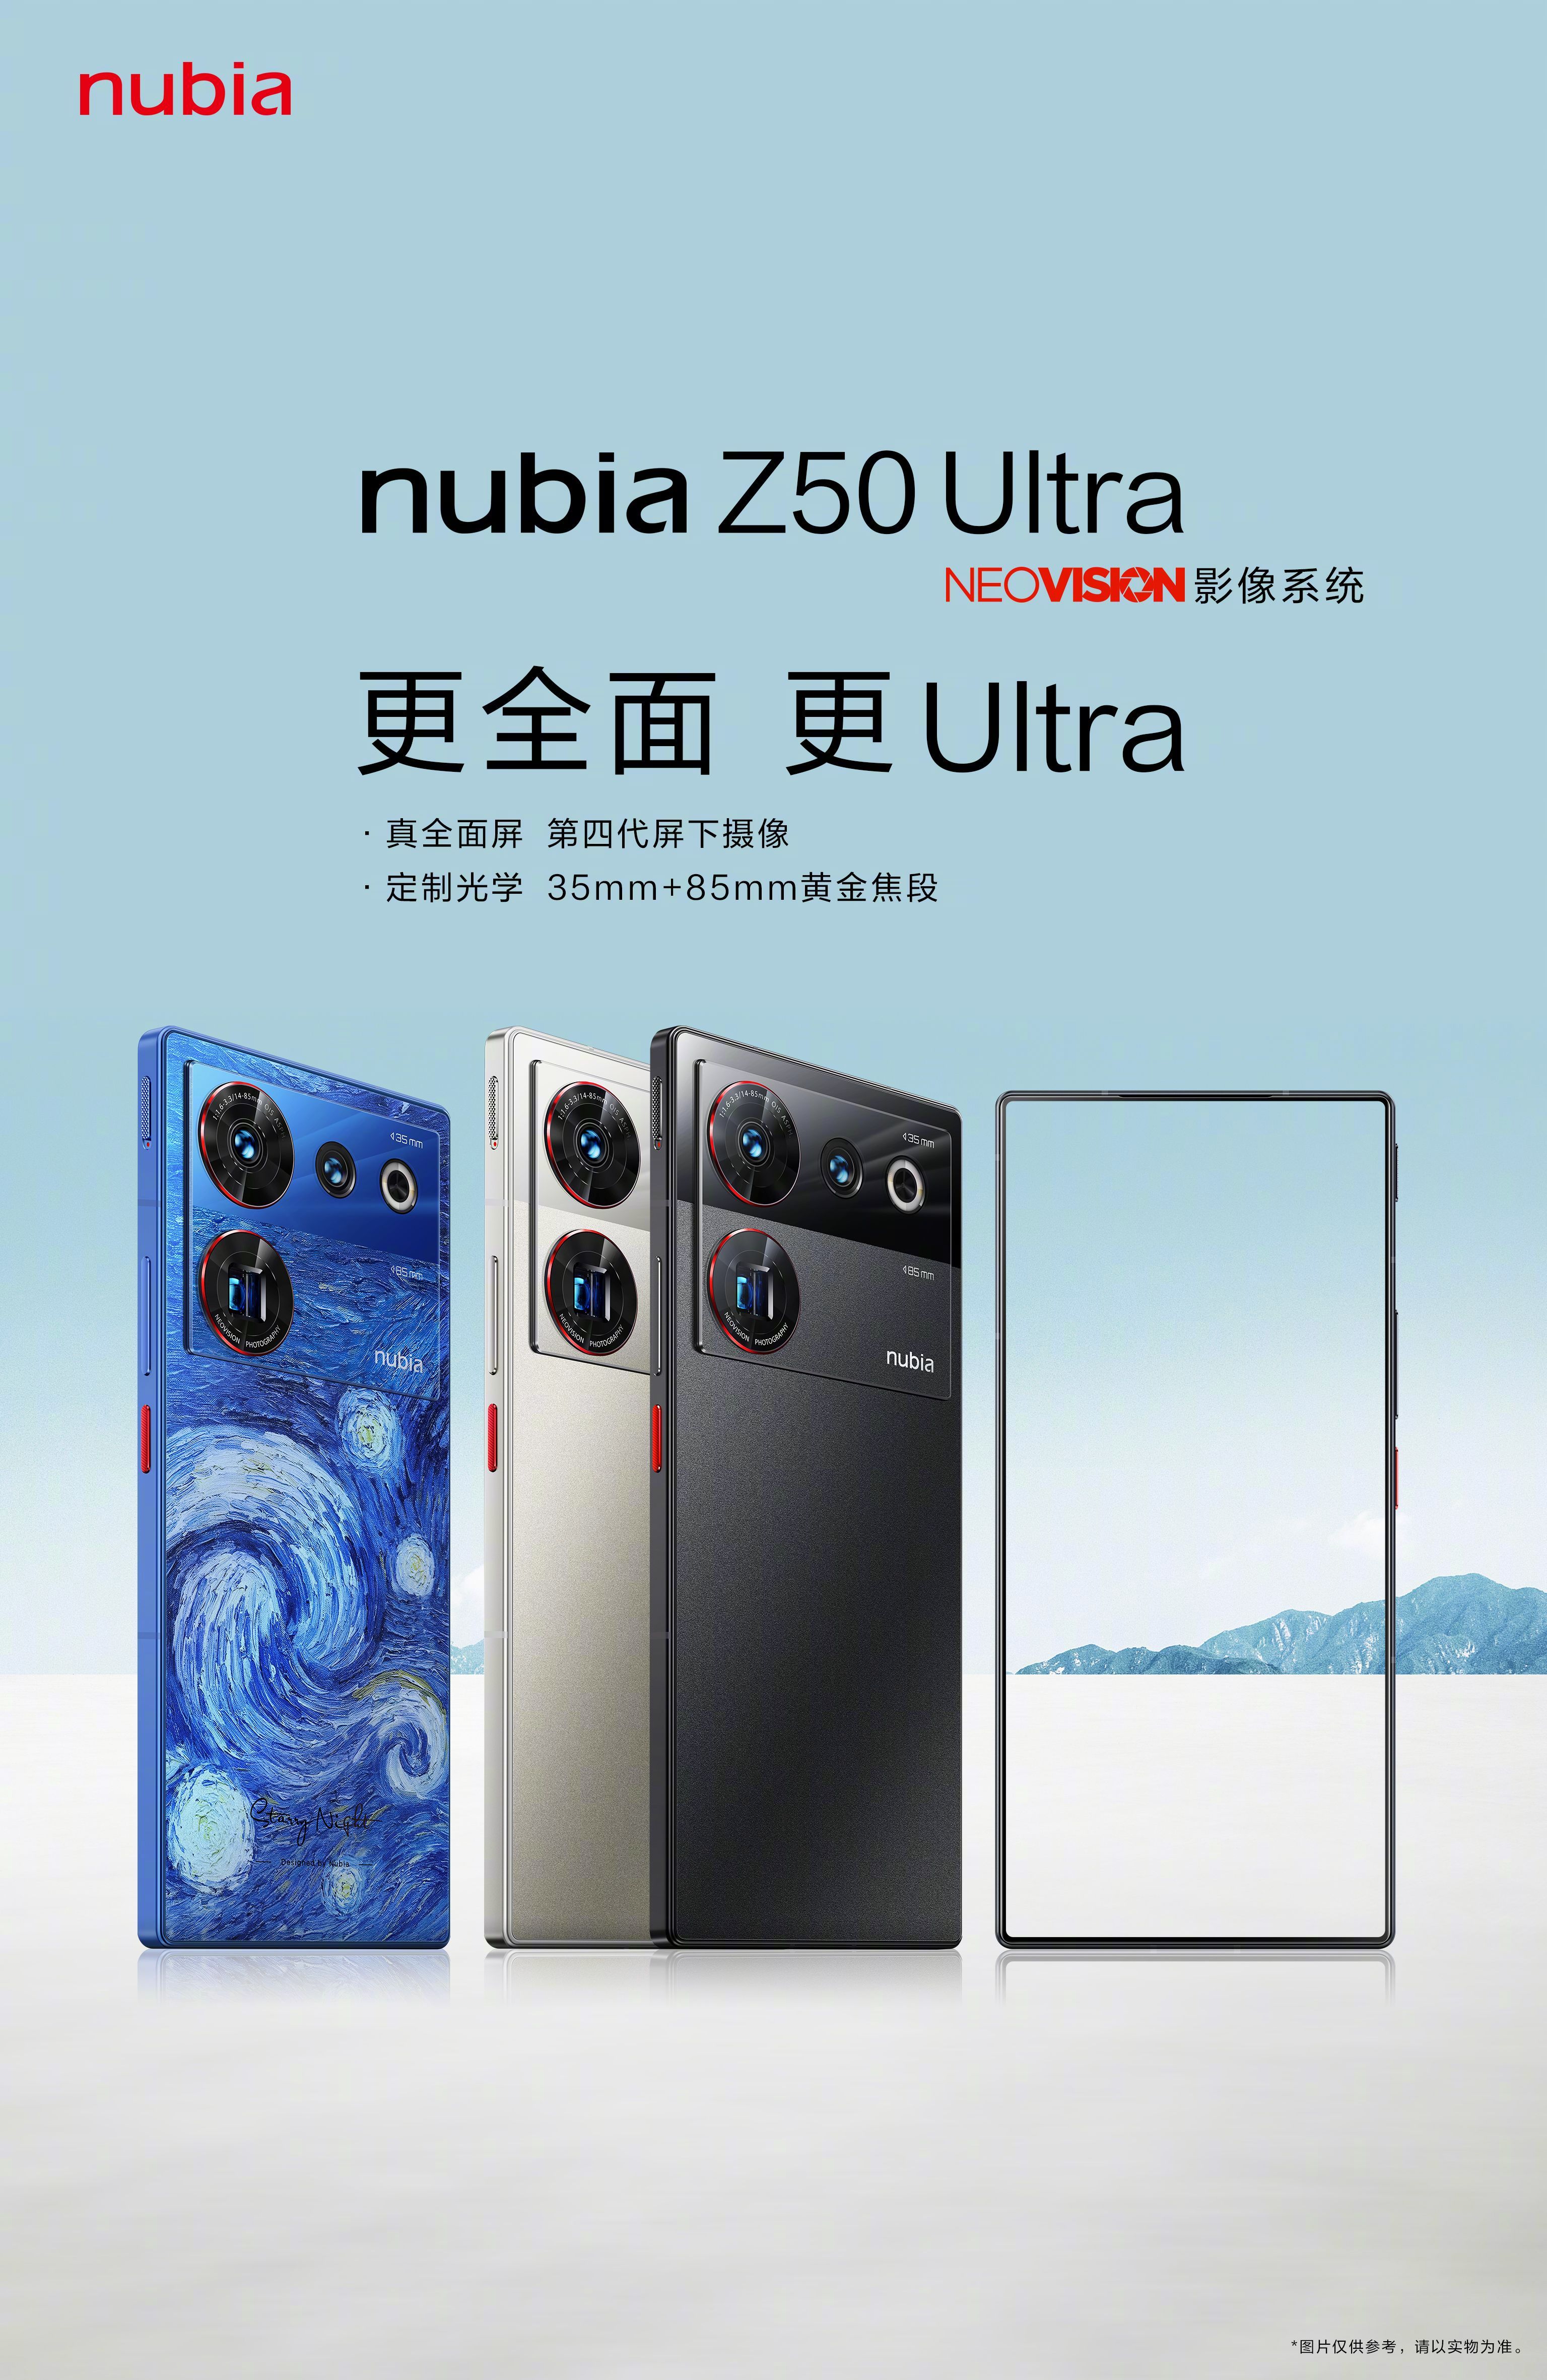 ZTE has revealed what the Nubia Z50 Ultra will look like: a flagship  smartphone with a giant camera and a display without holes or cut-outs